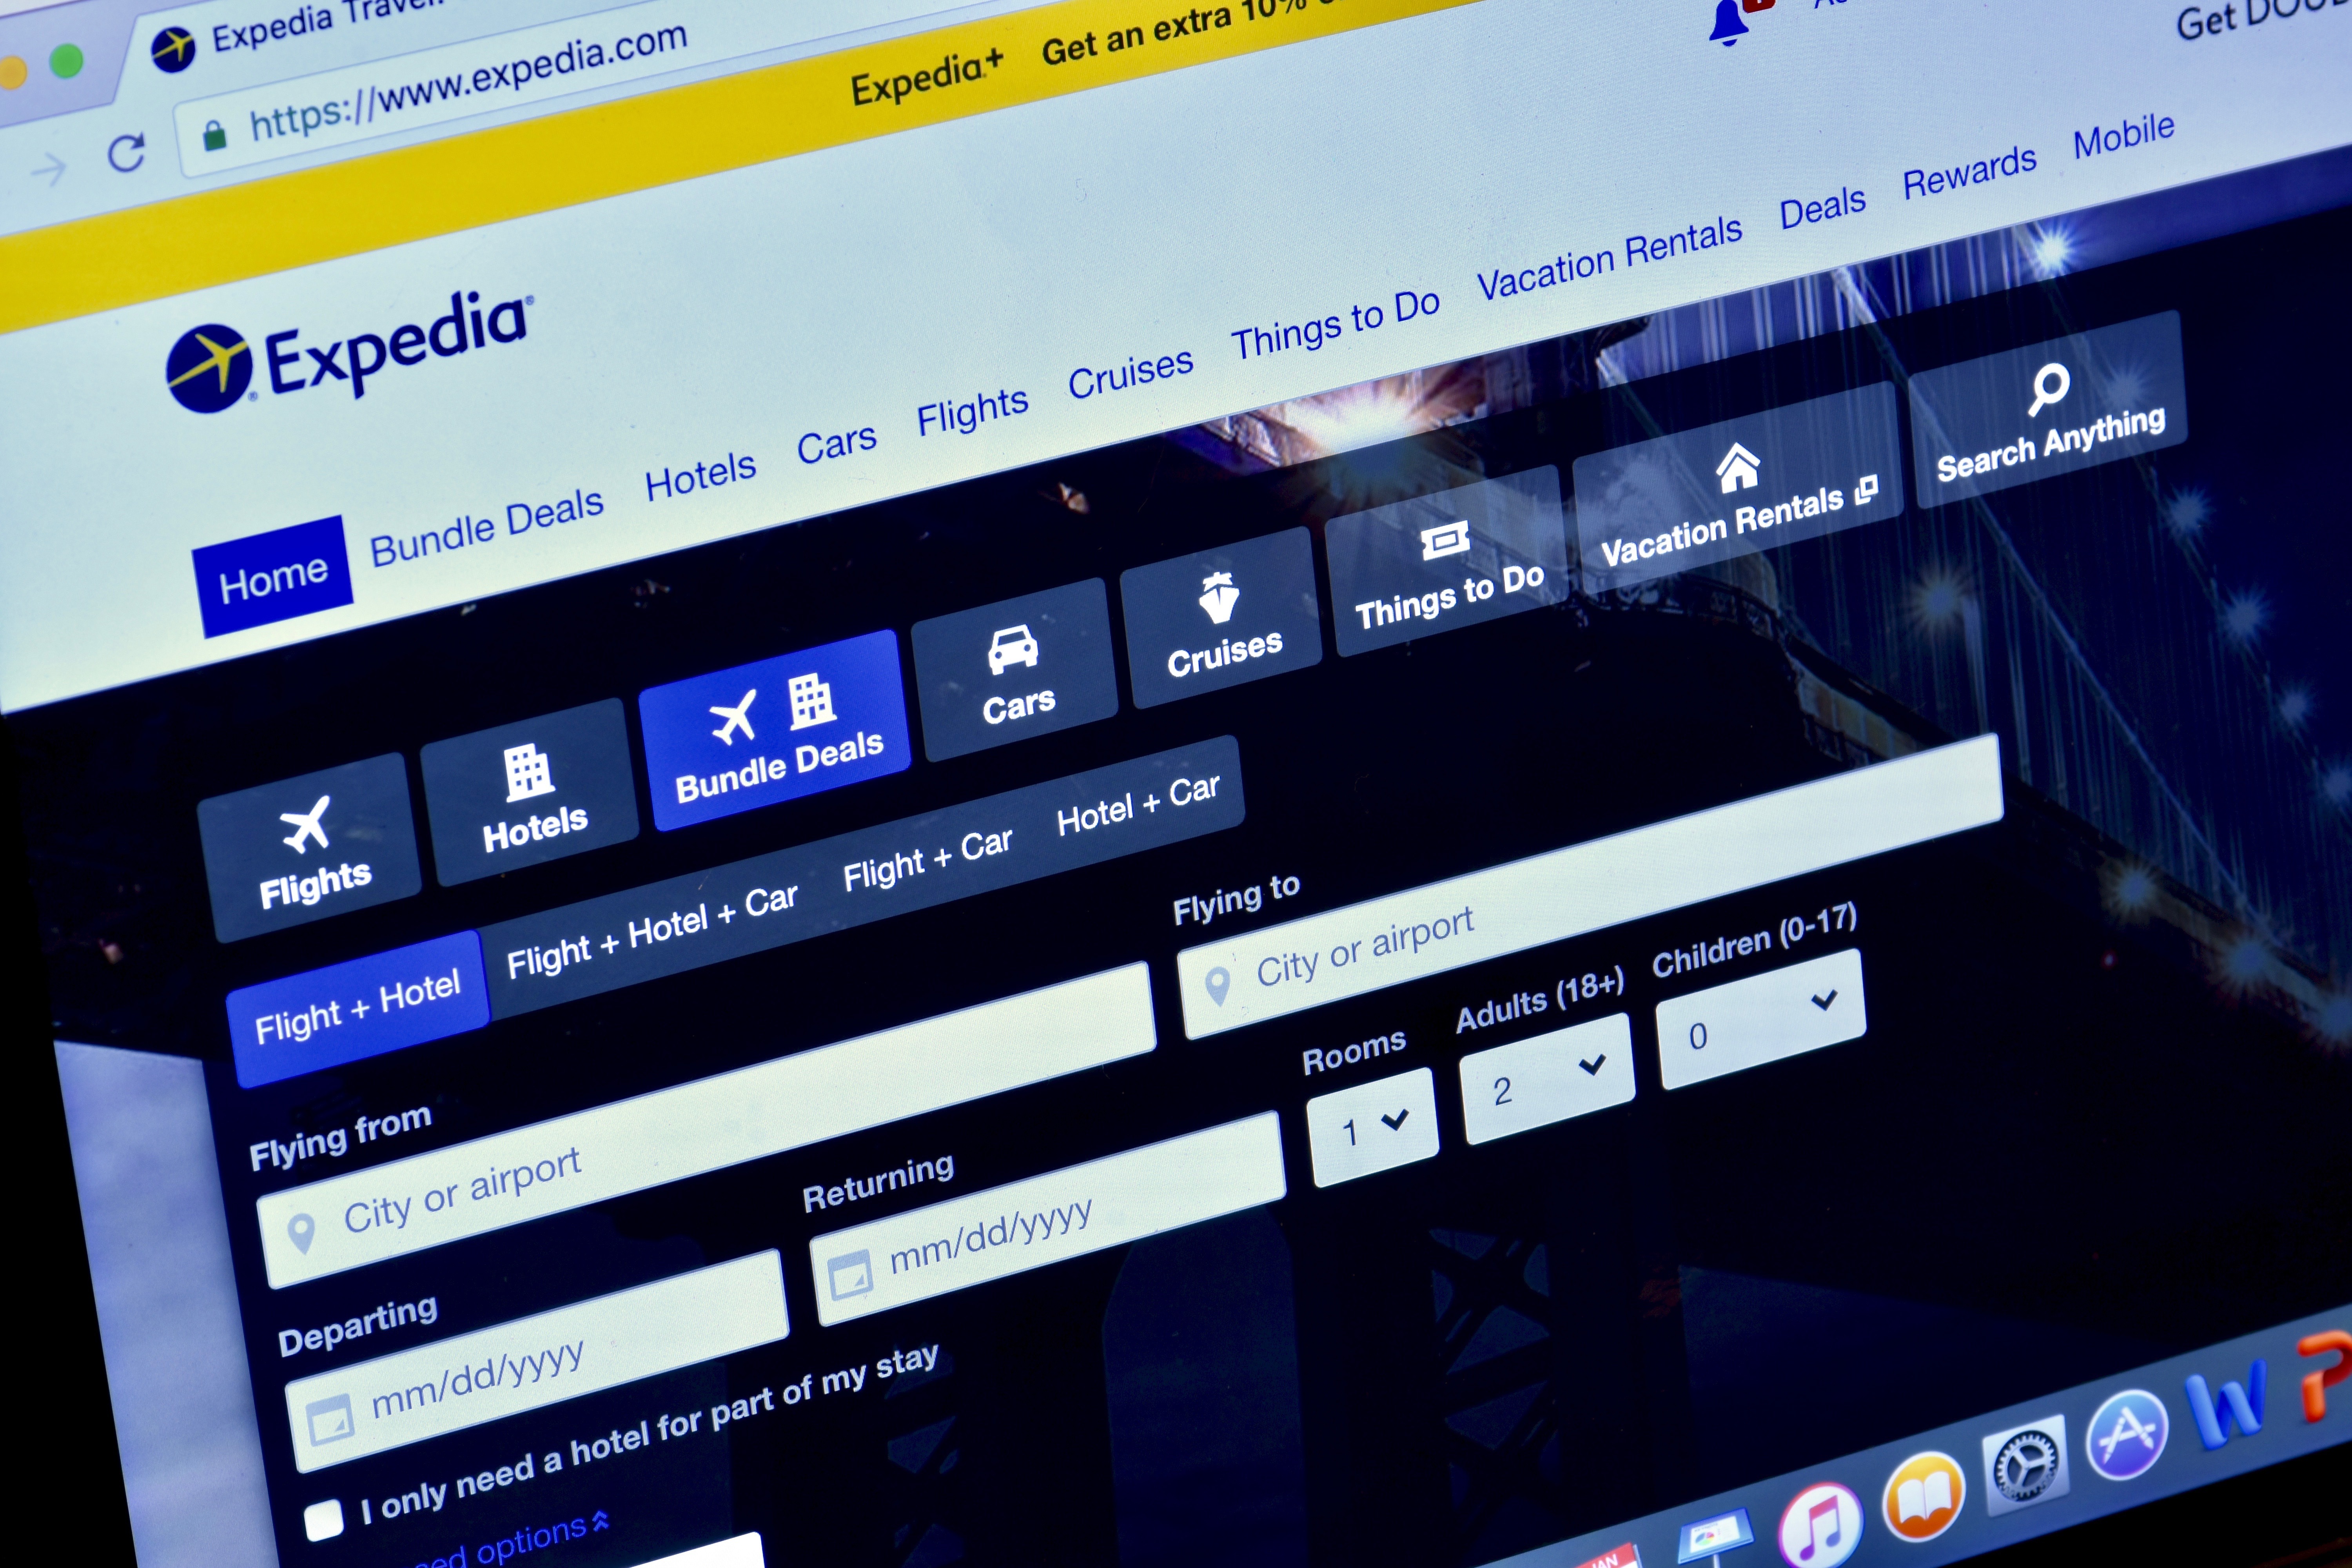 Bitcoin-Accepting Expedia to Accelerate Its Global Expansion | LinkedIn